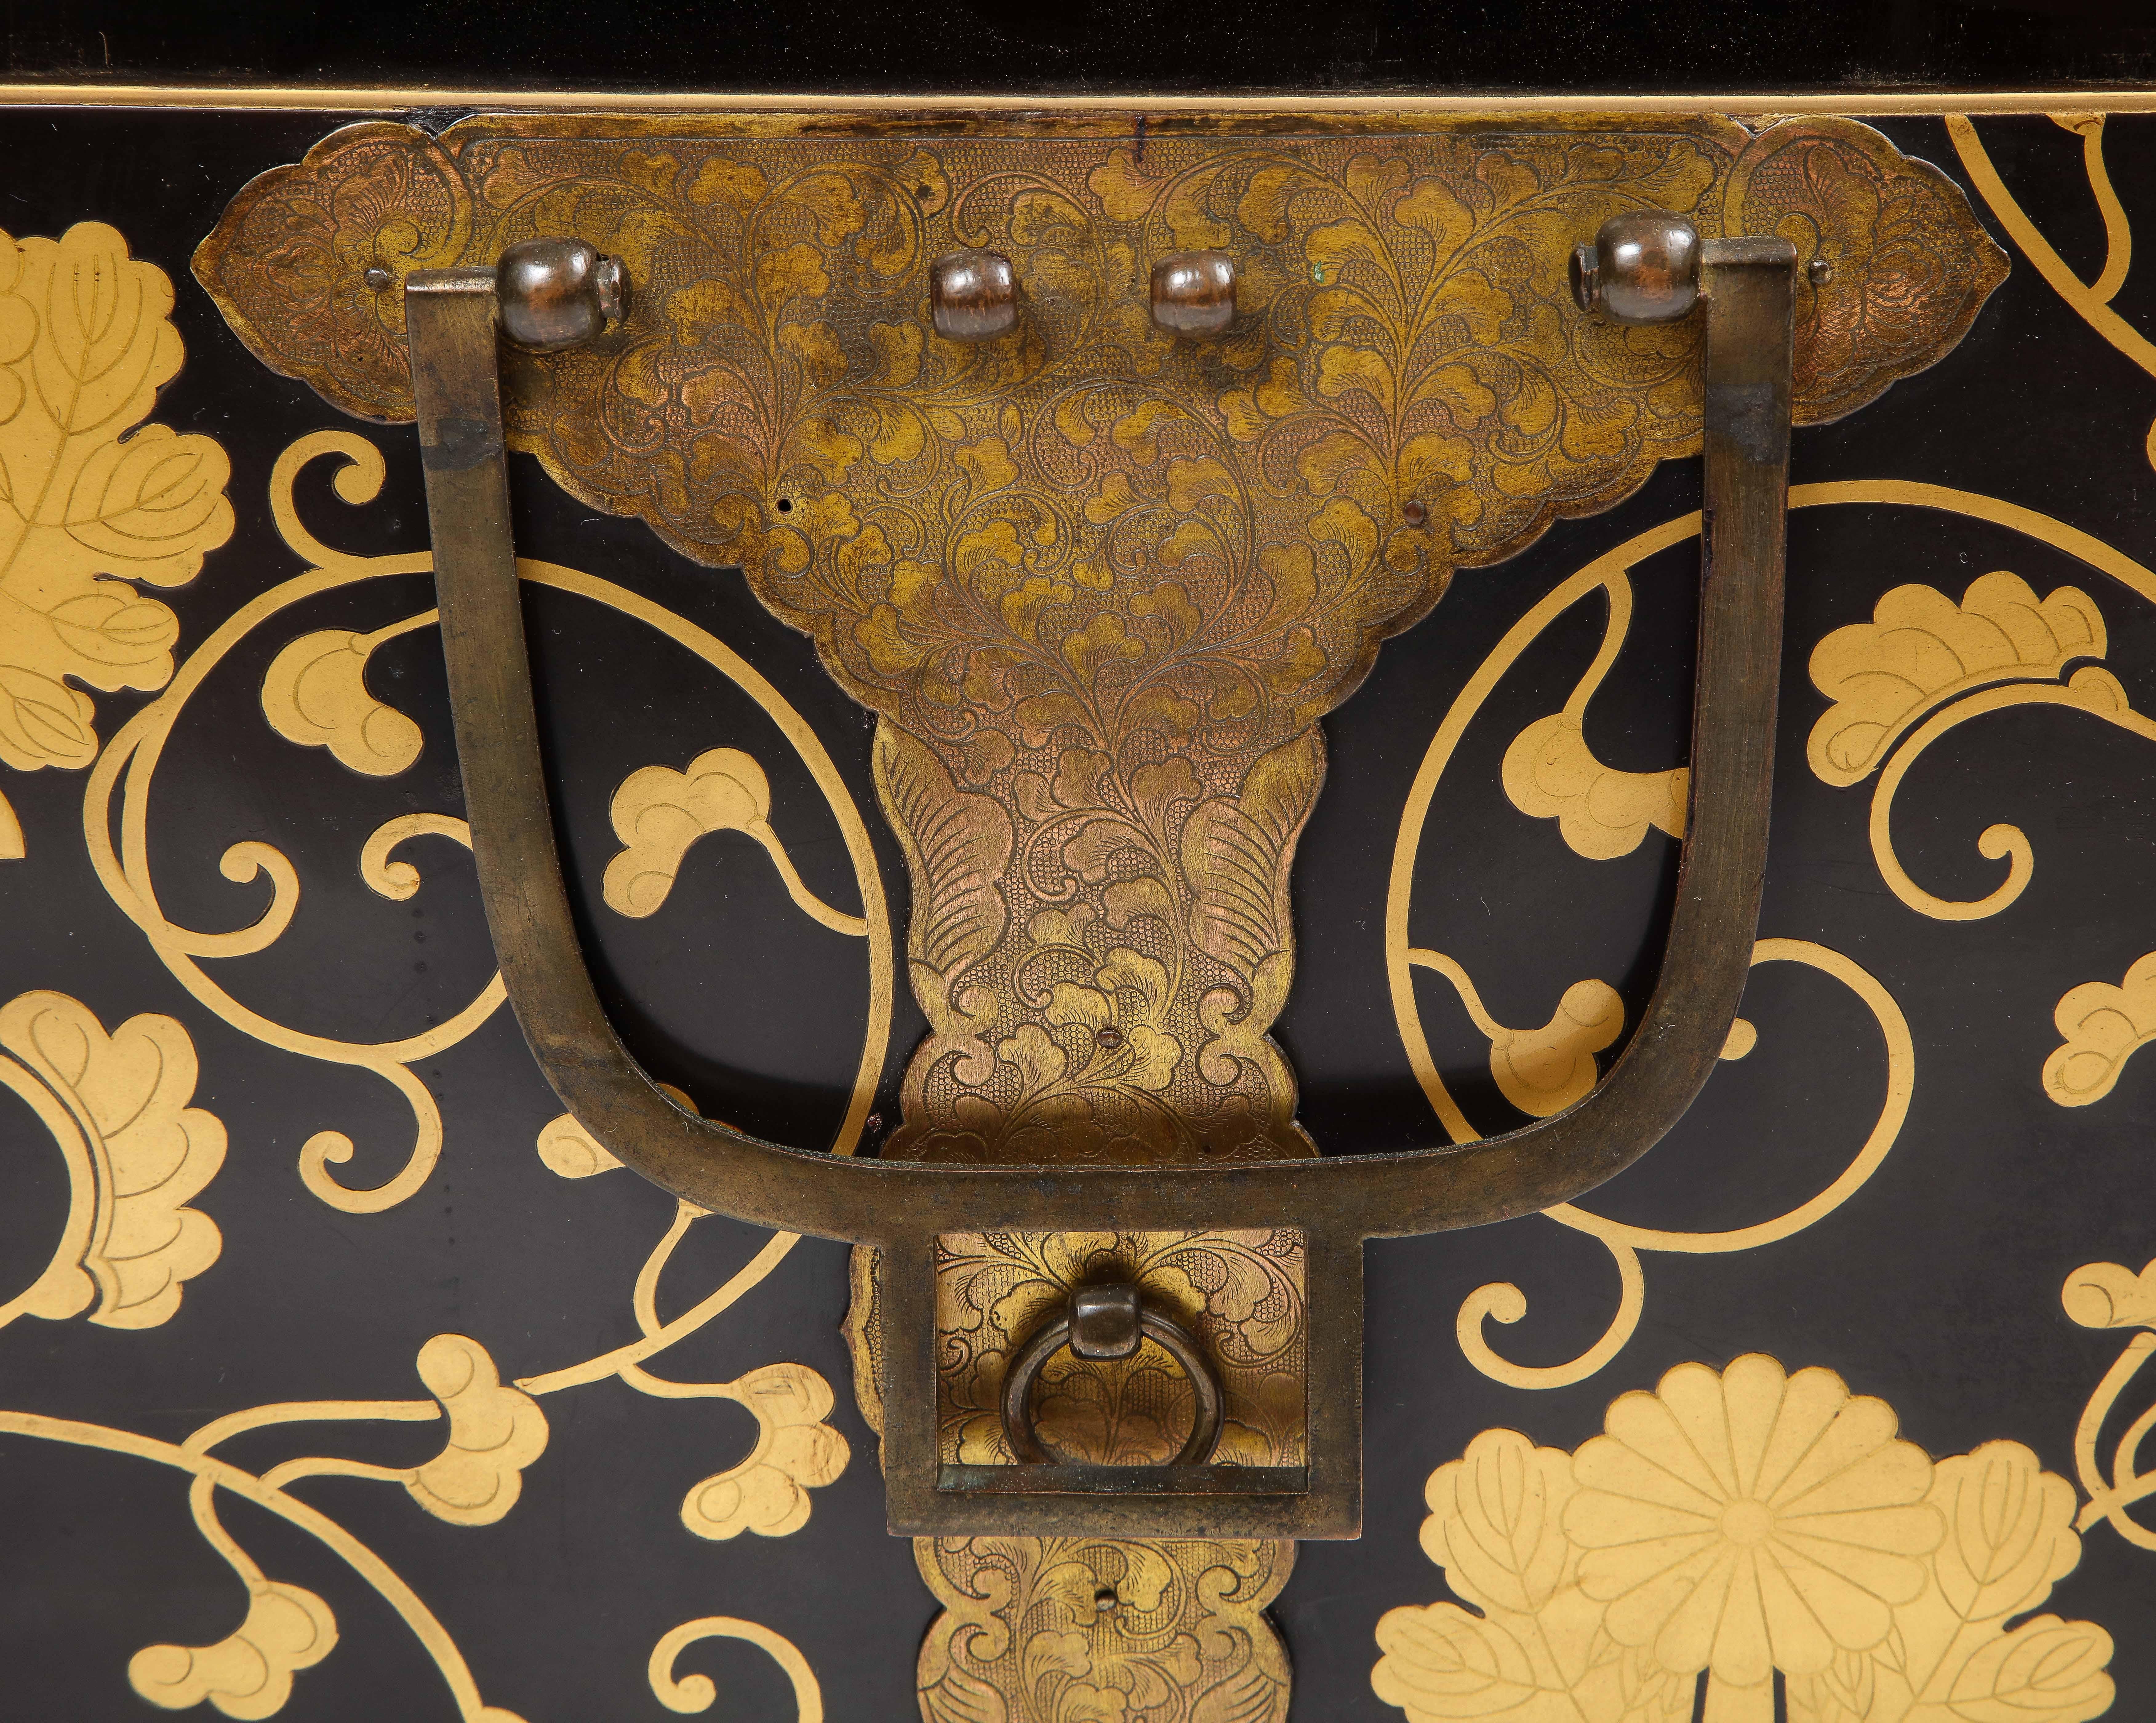  Pair of 19th Century Japanese Meiji Period Dore Bronze Mounted Lacquered Chests For Sale 9